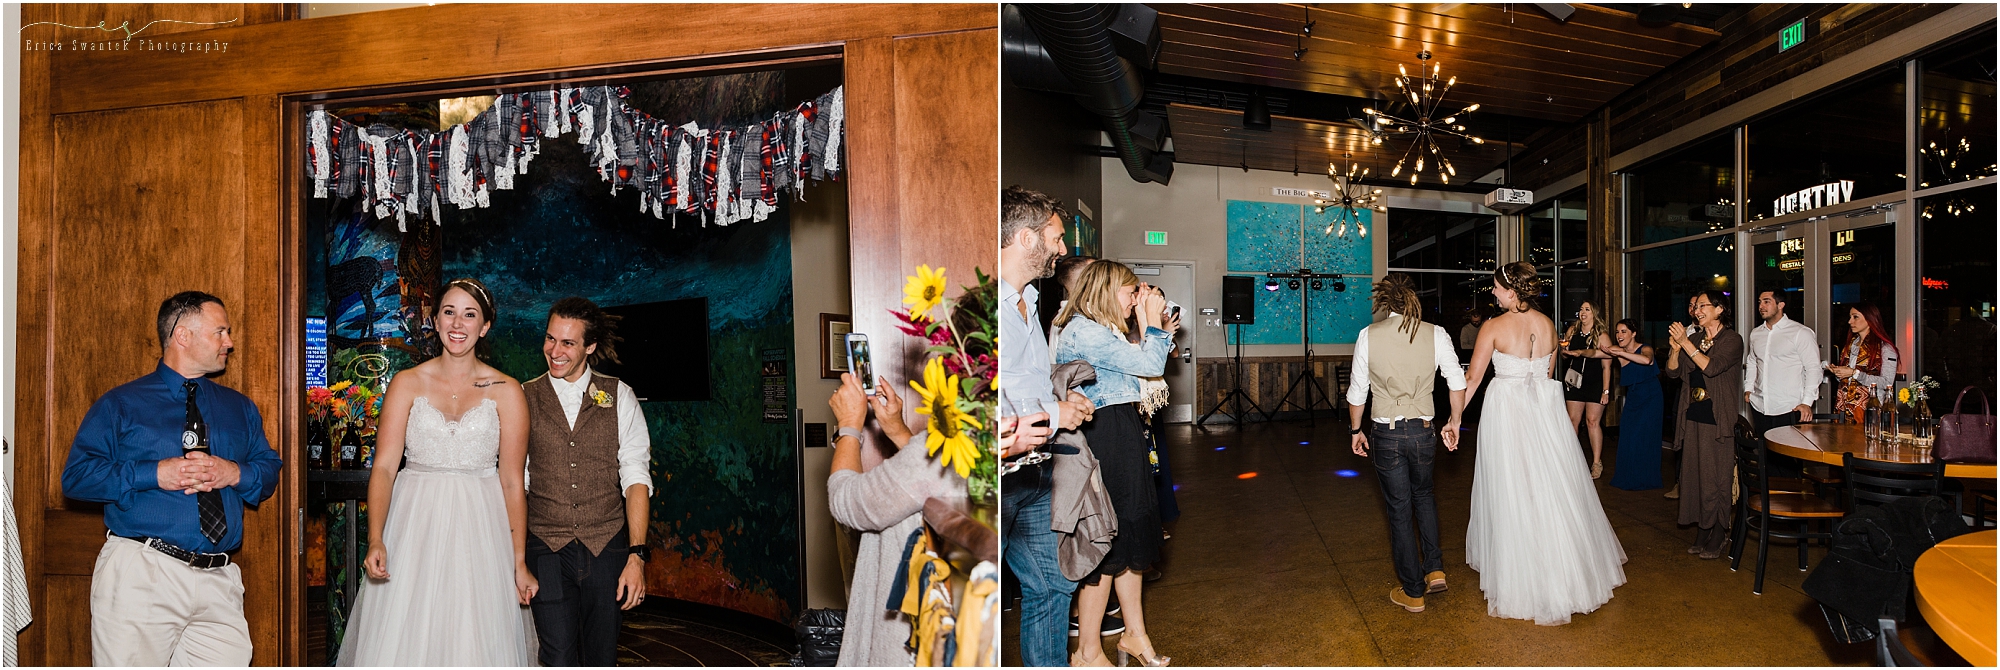 A couple makes their grand entrance into the Hop Mahal reception space at their Worthy Brewing Wedding in Bend Oregon. | Erica Swantek Photography